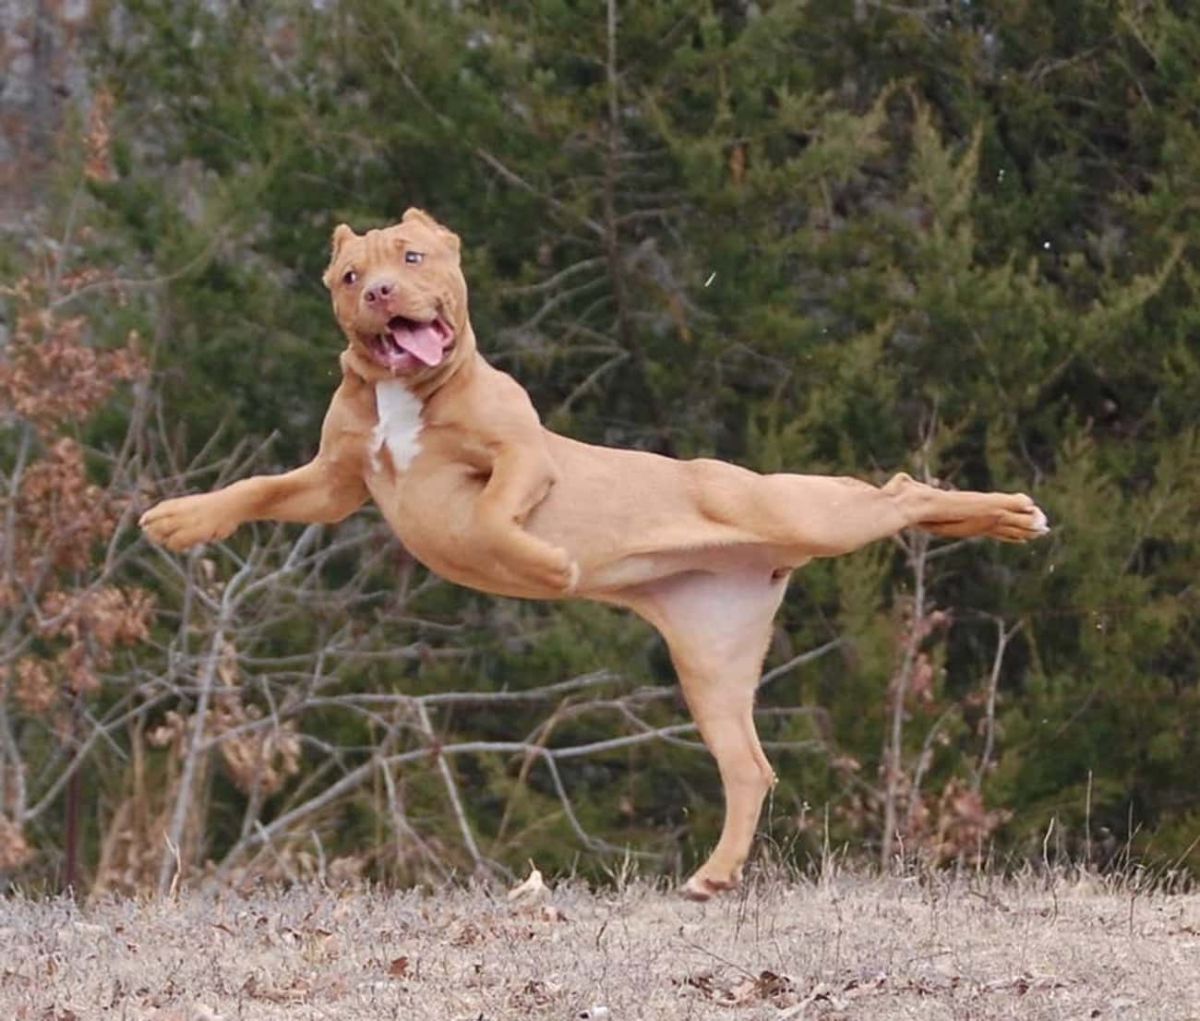 brown and white pitbull caught mid-jump standing on one back leg with one front leg and one back leg extended outwards